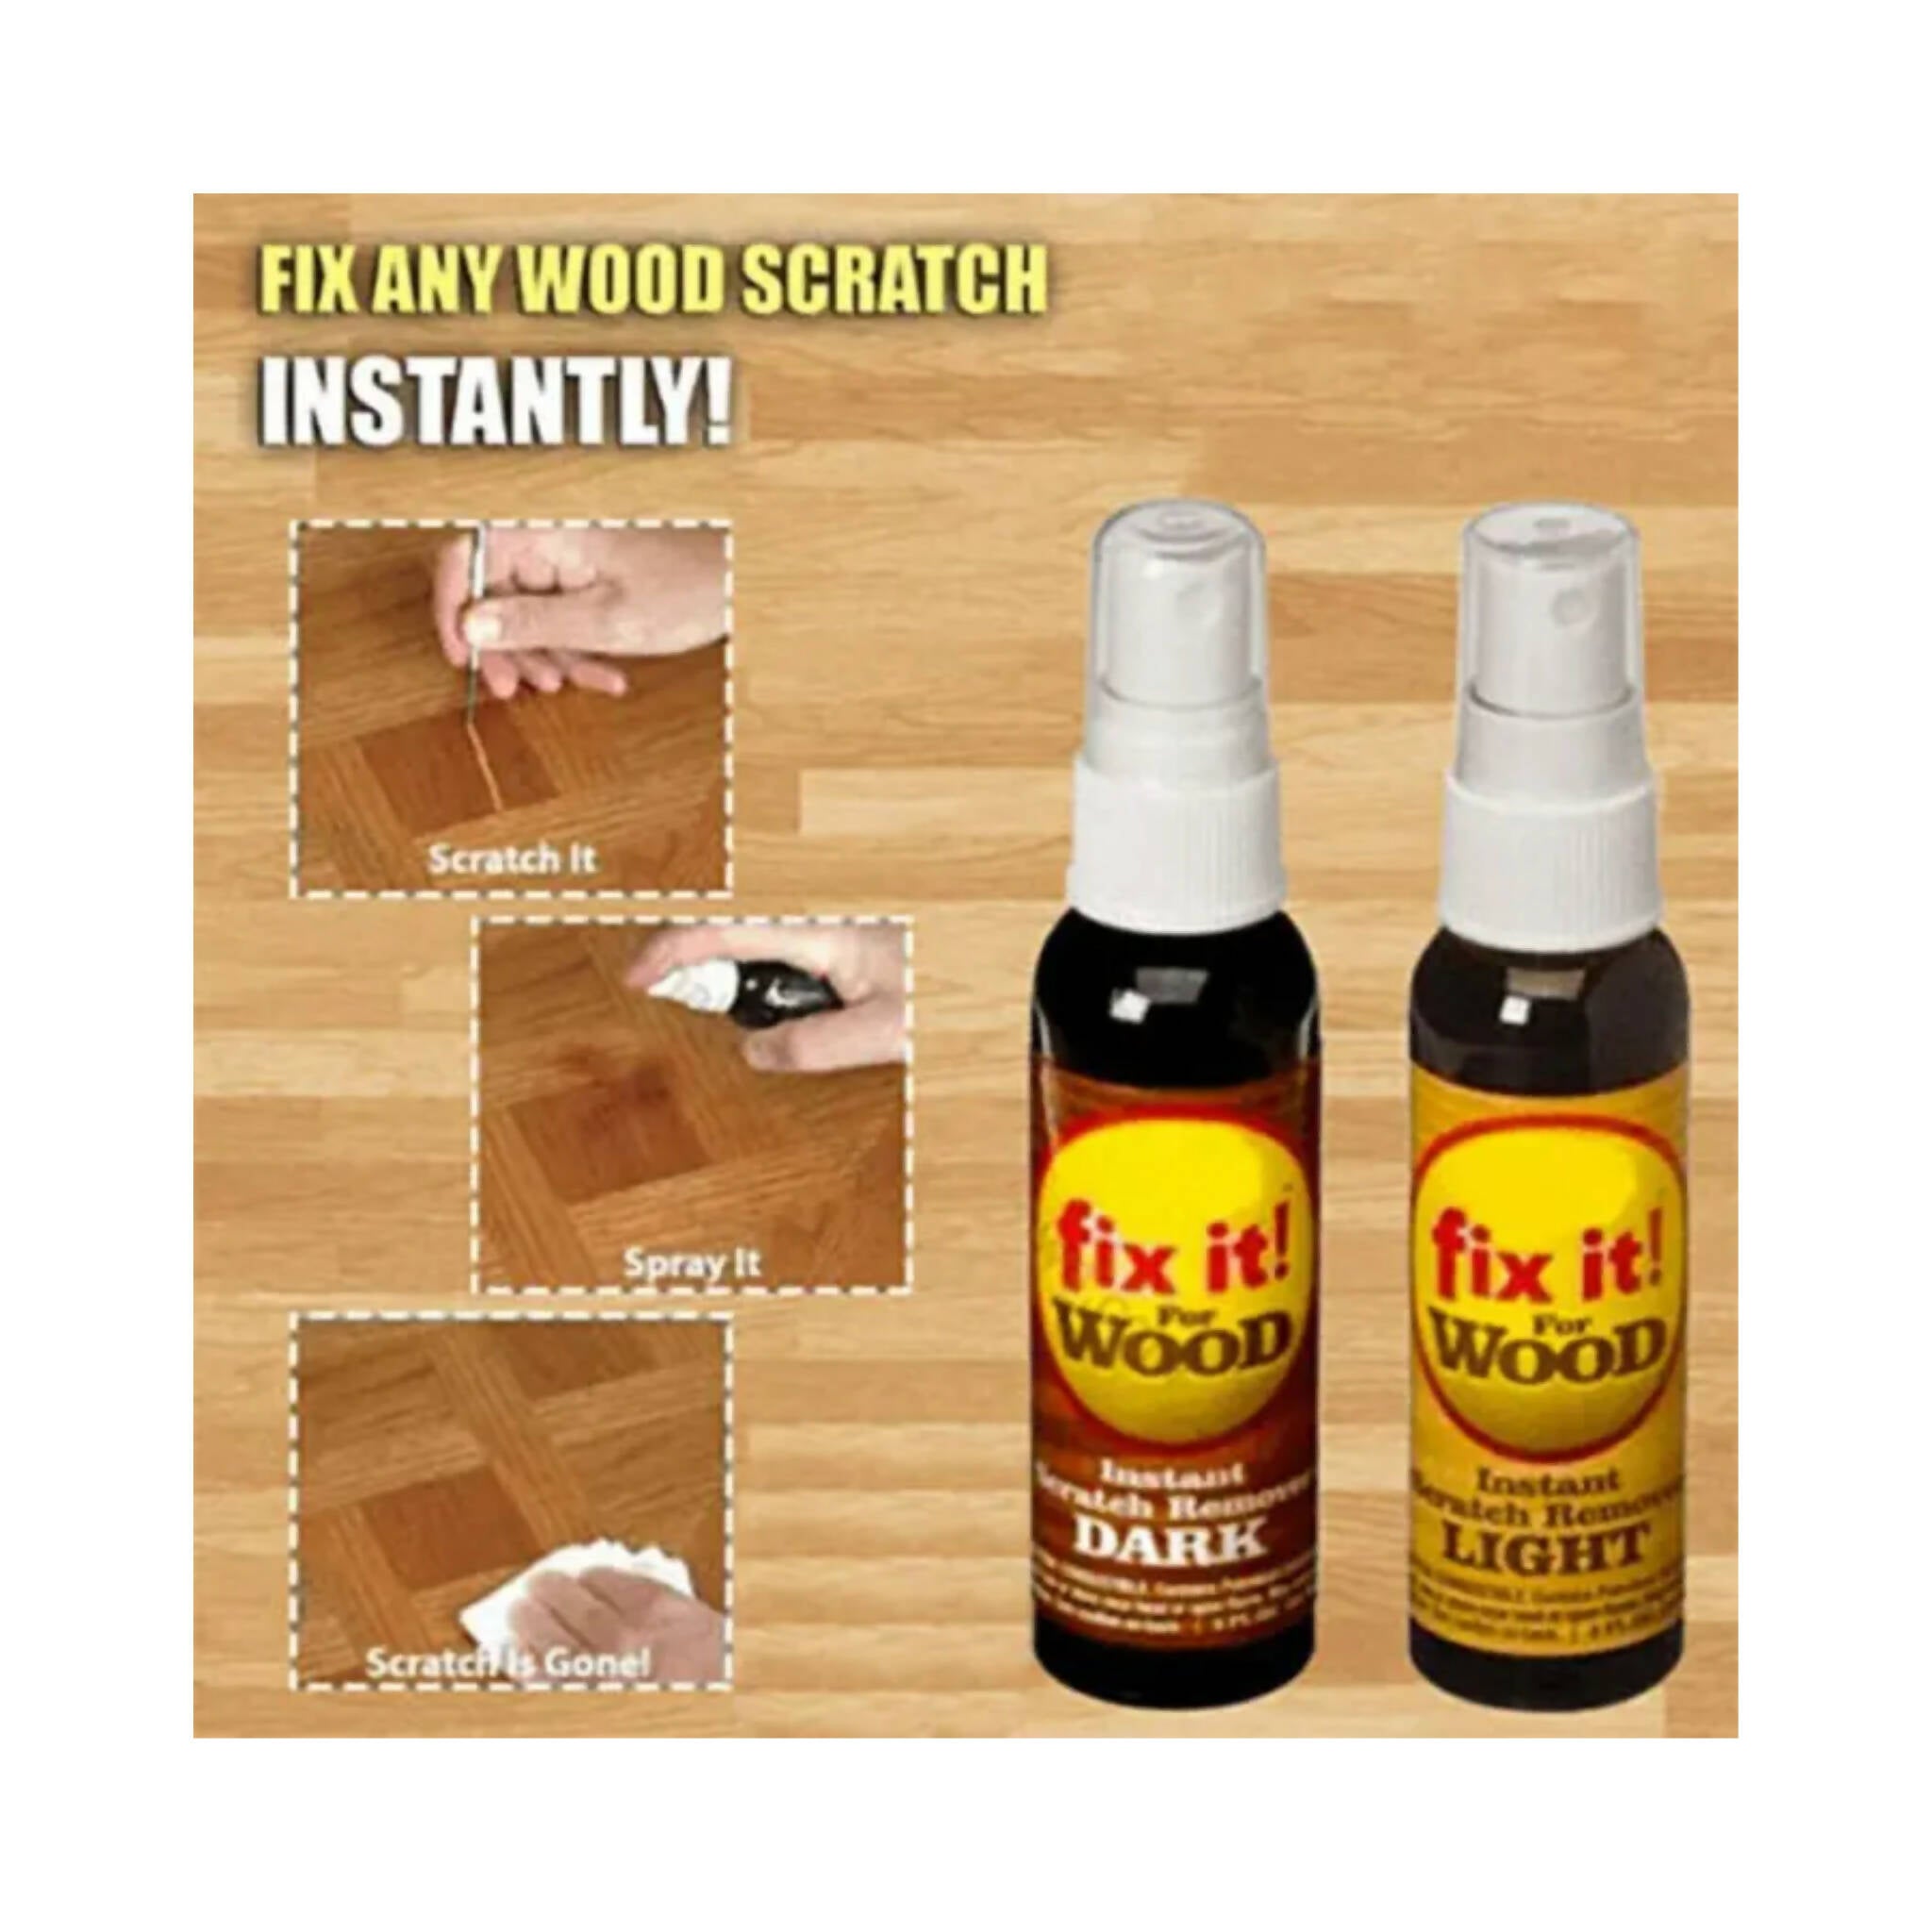 Wood Scratch Remover, Fix it! Fast Action & Restore Your Furniture!